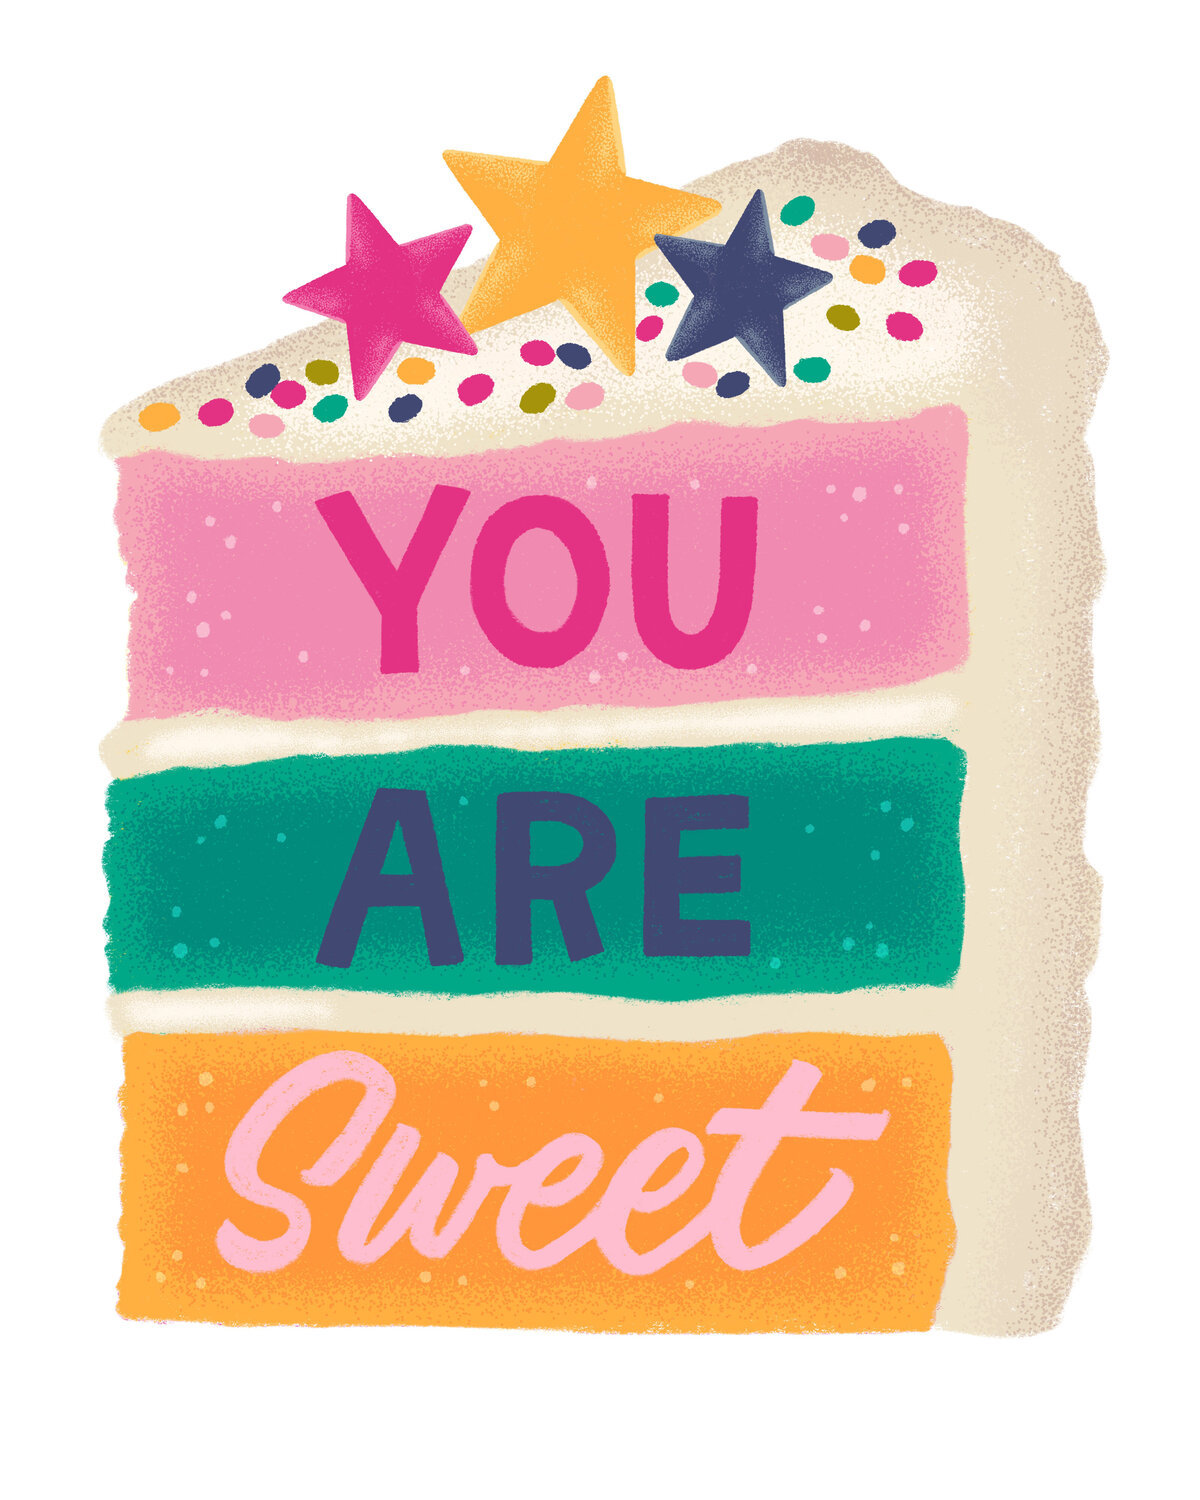 You are Sweet